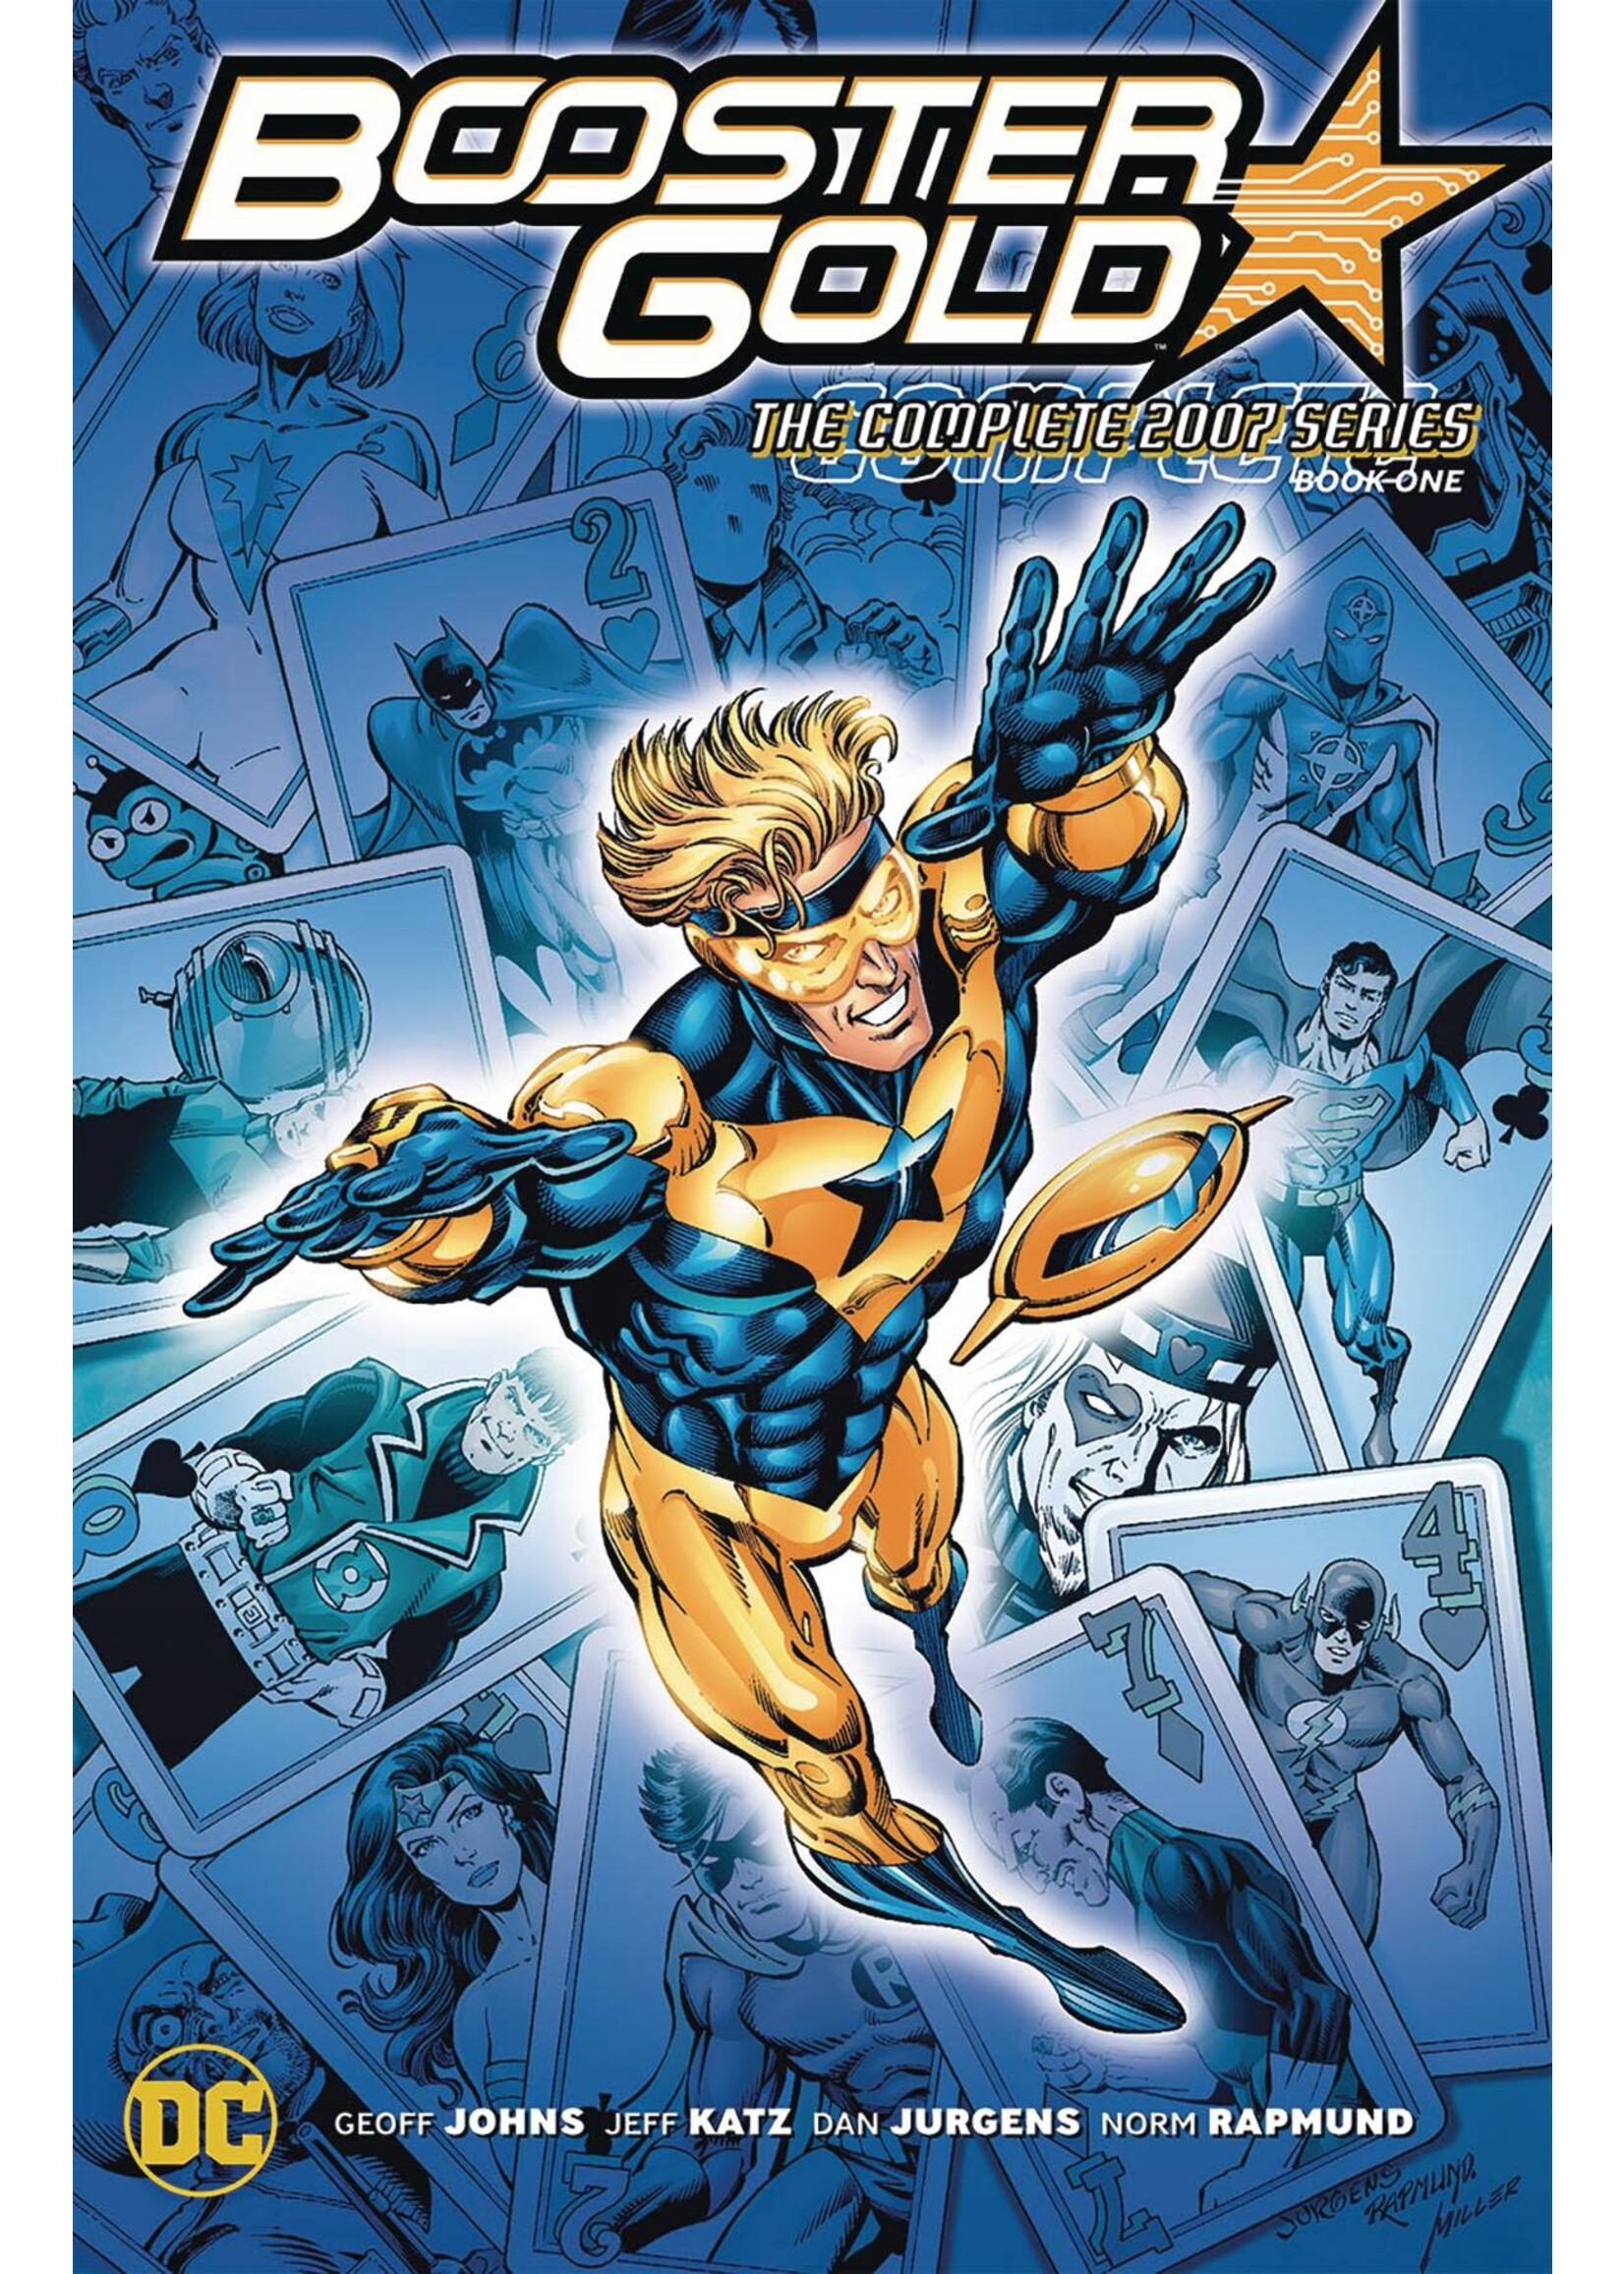 DC COMICS BOOSTER GOLD COMPLETE 2007 BOOK 01